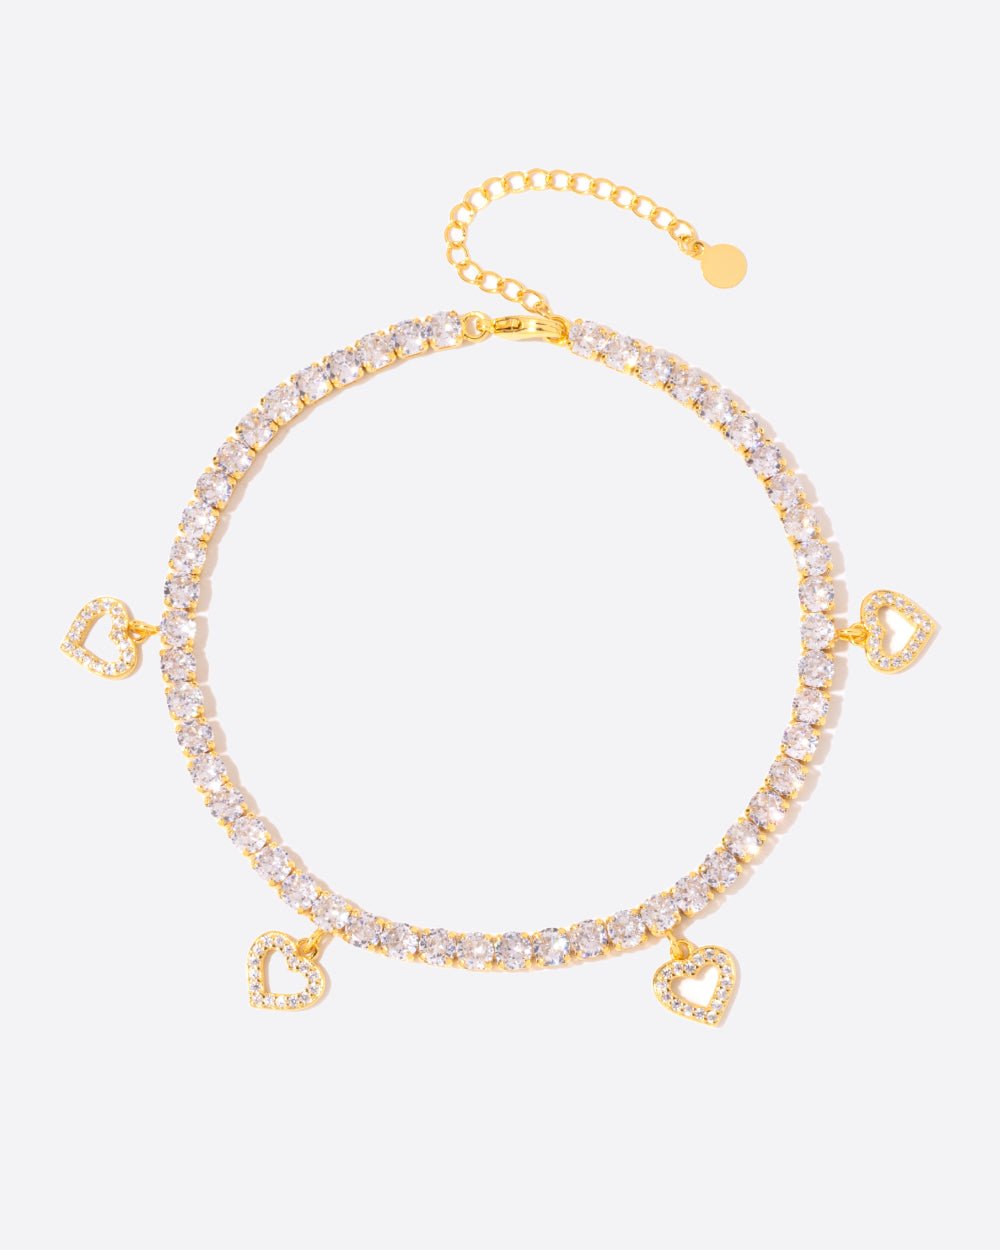 ICED HEARTS TENNIS ANKLET. - 4MM 18K GOLD - Drippy Amsterdam